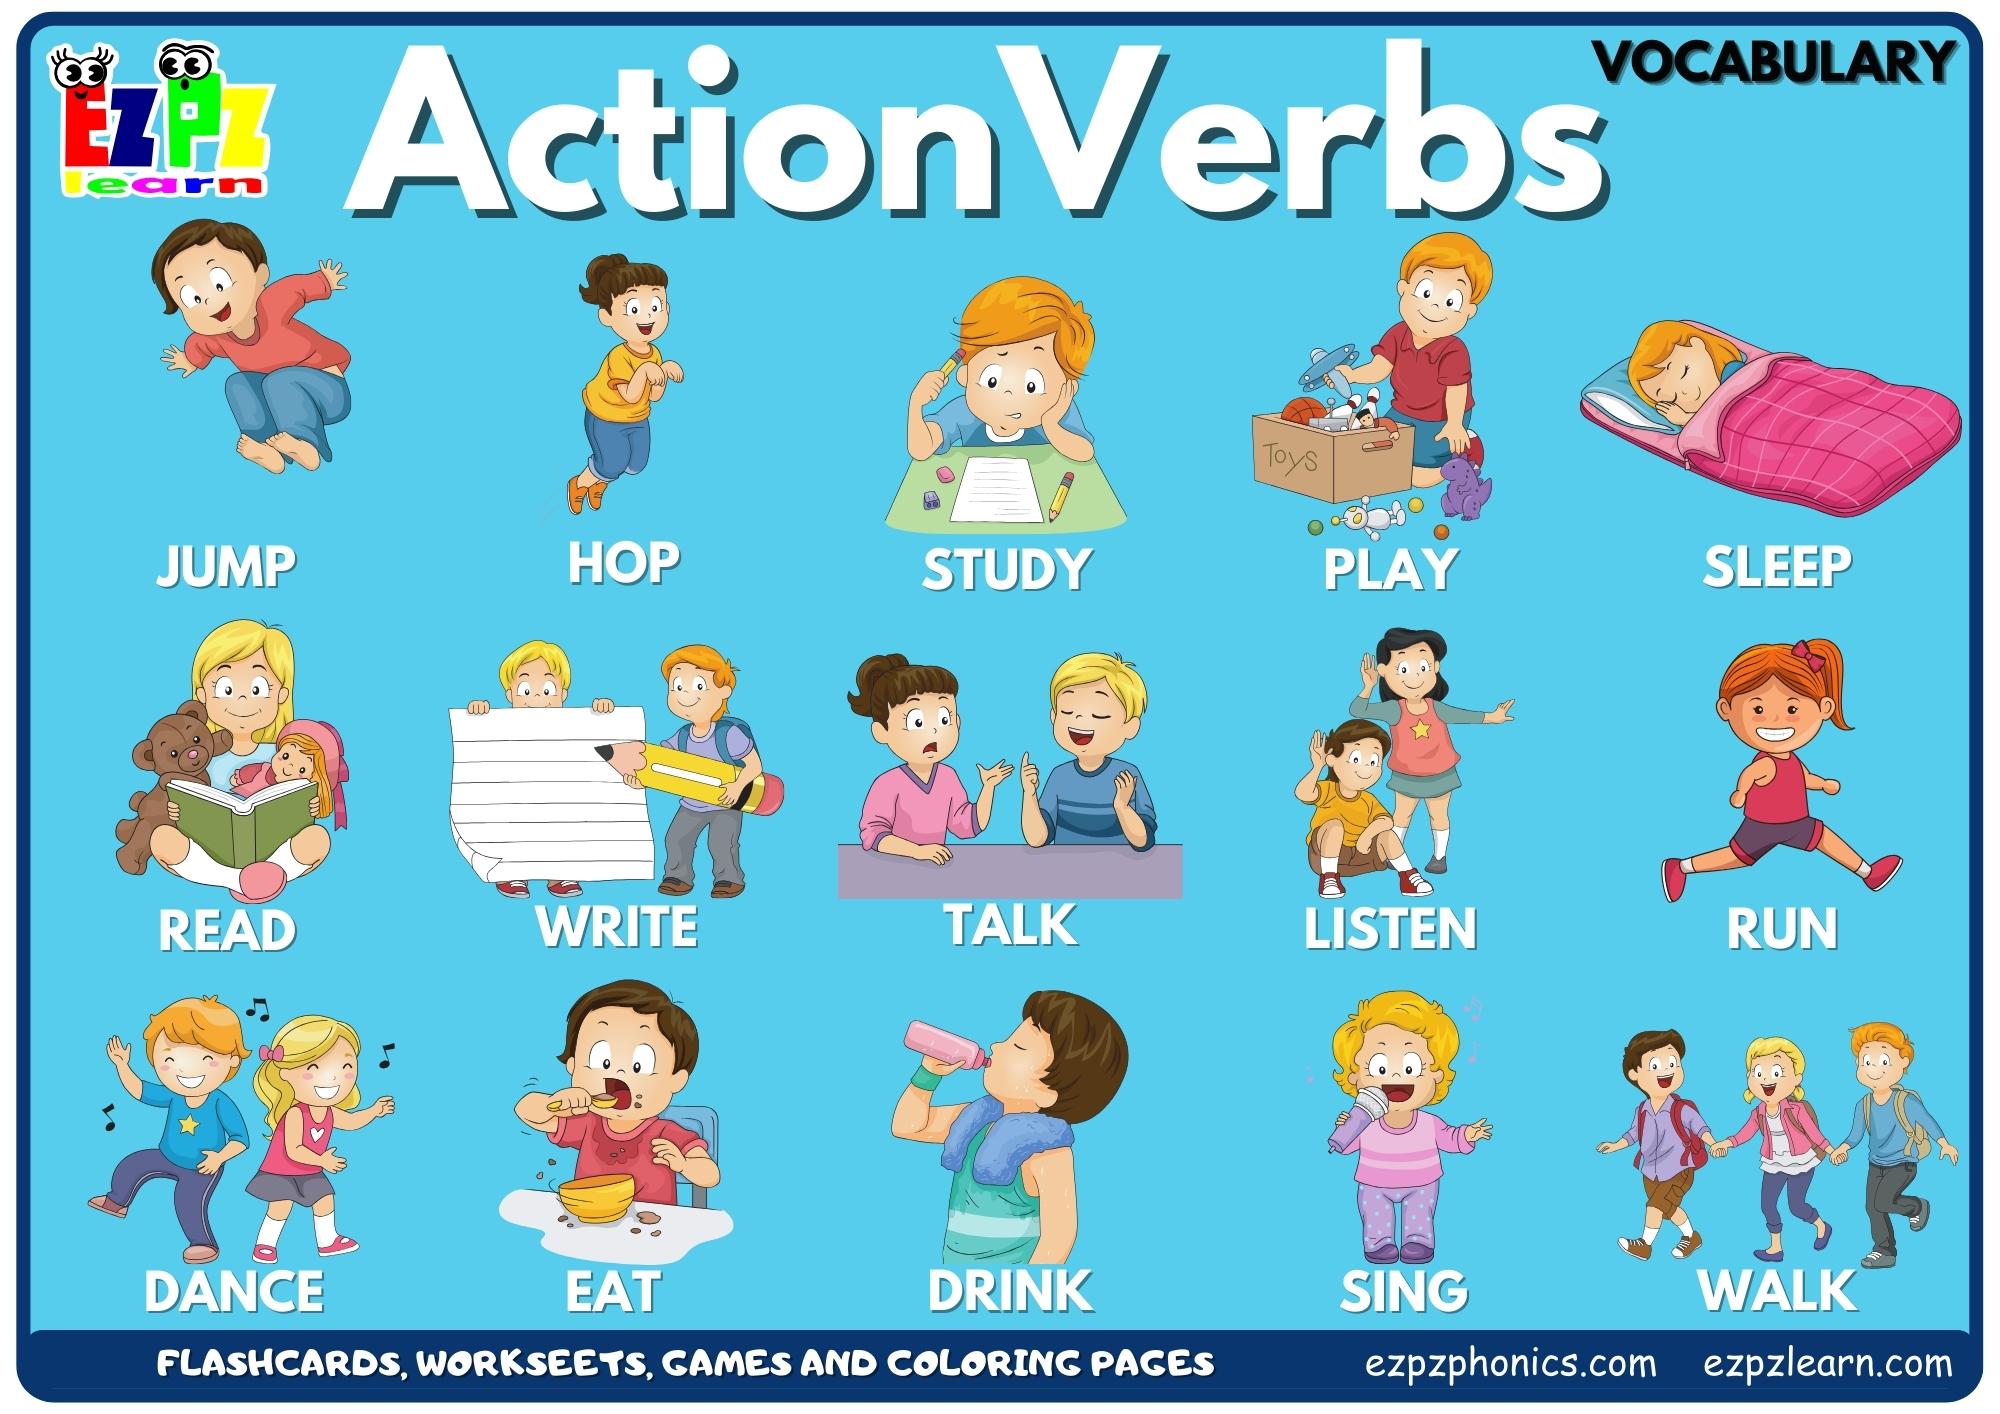 Clothes Vocabulary Picture Dictionary Join Now for Free Flashcards,  Worksheets and Coloring Pages 